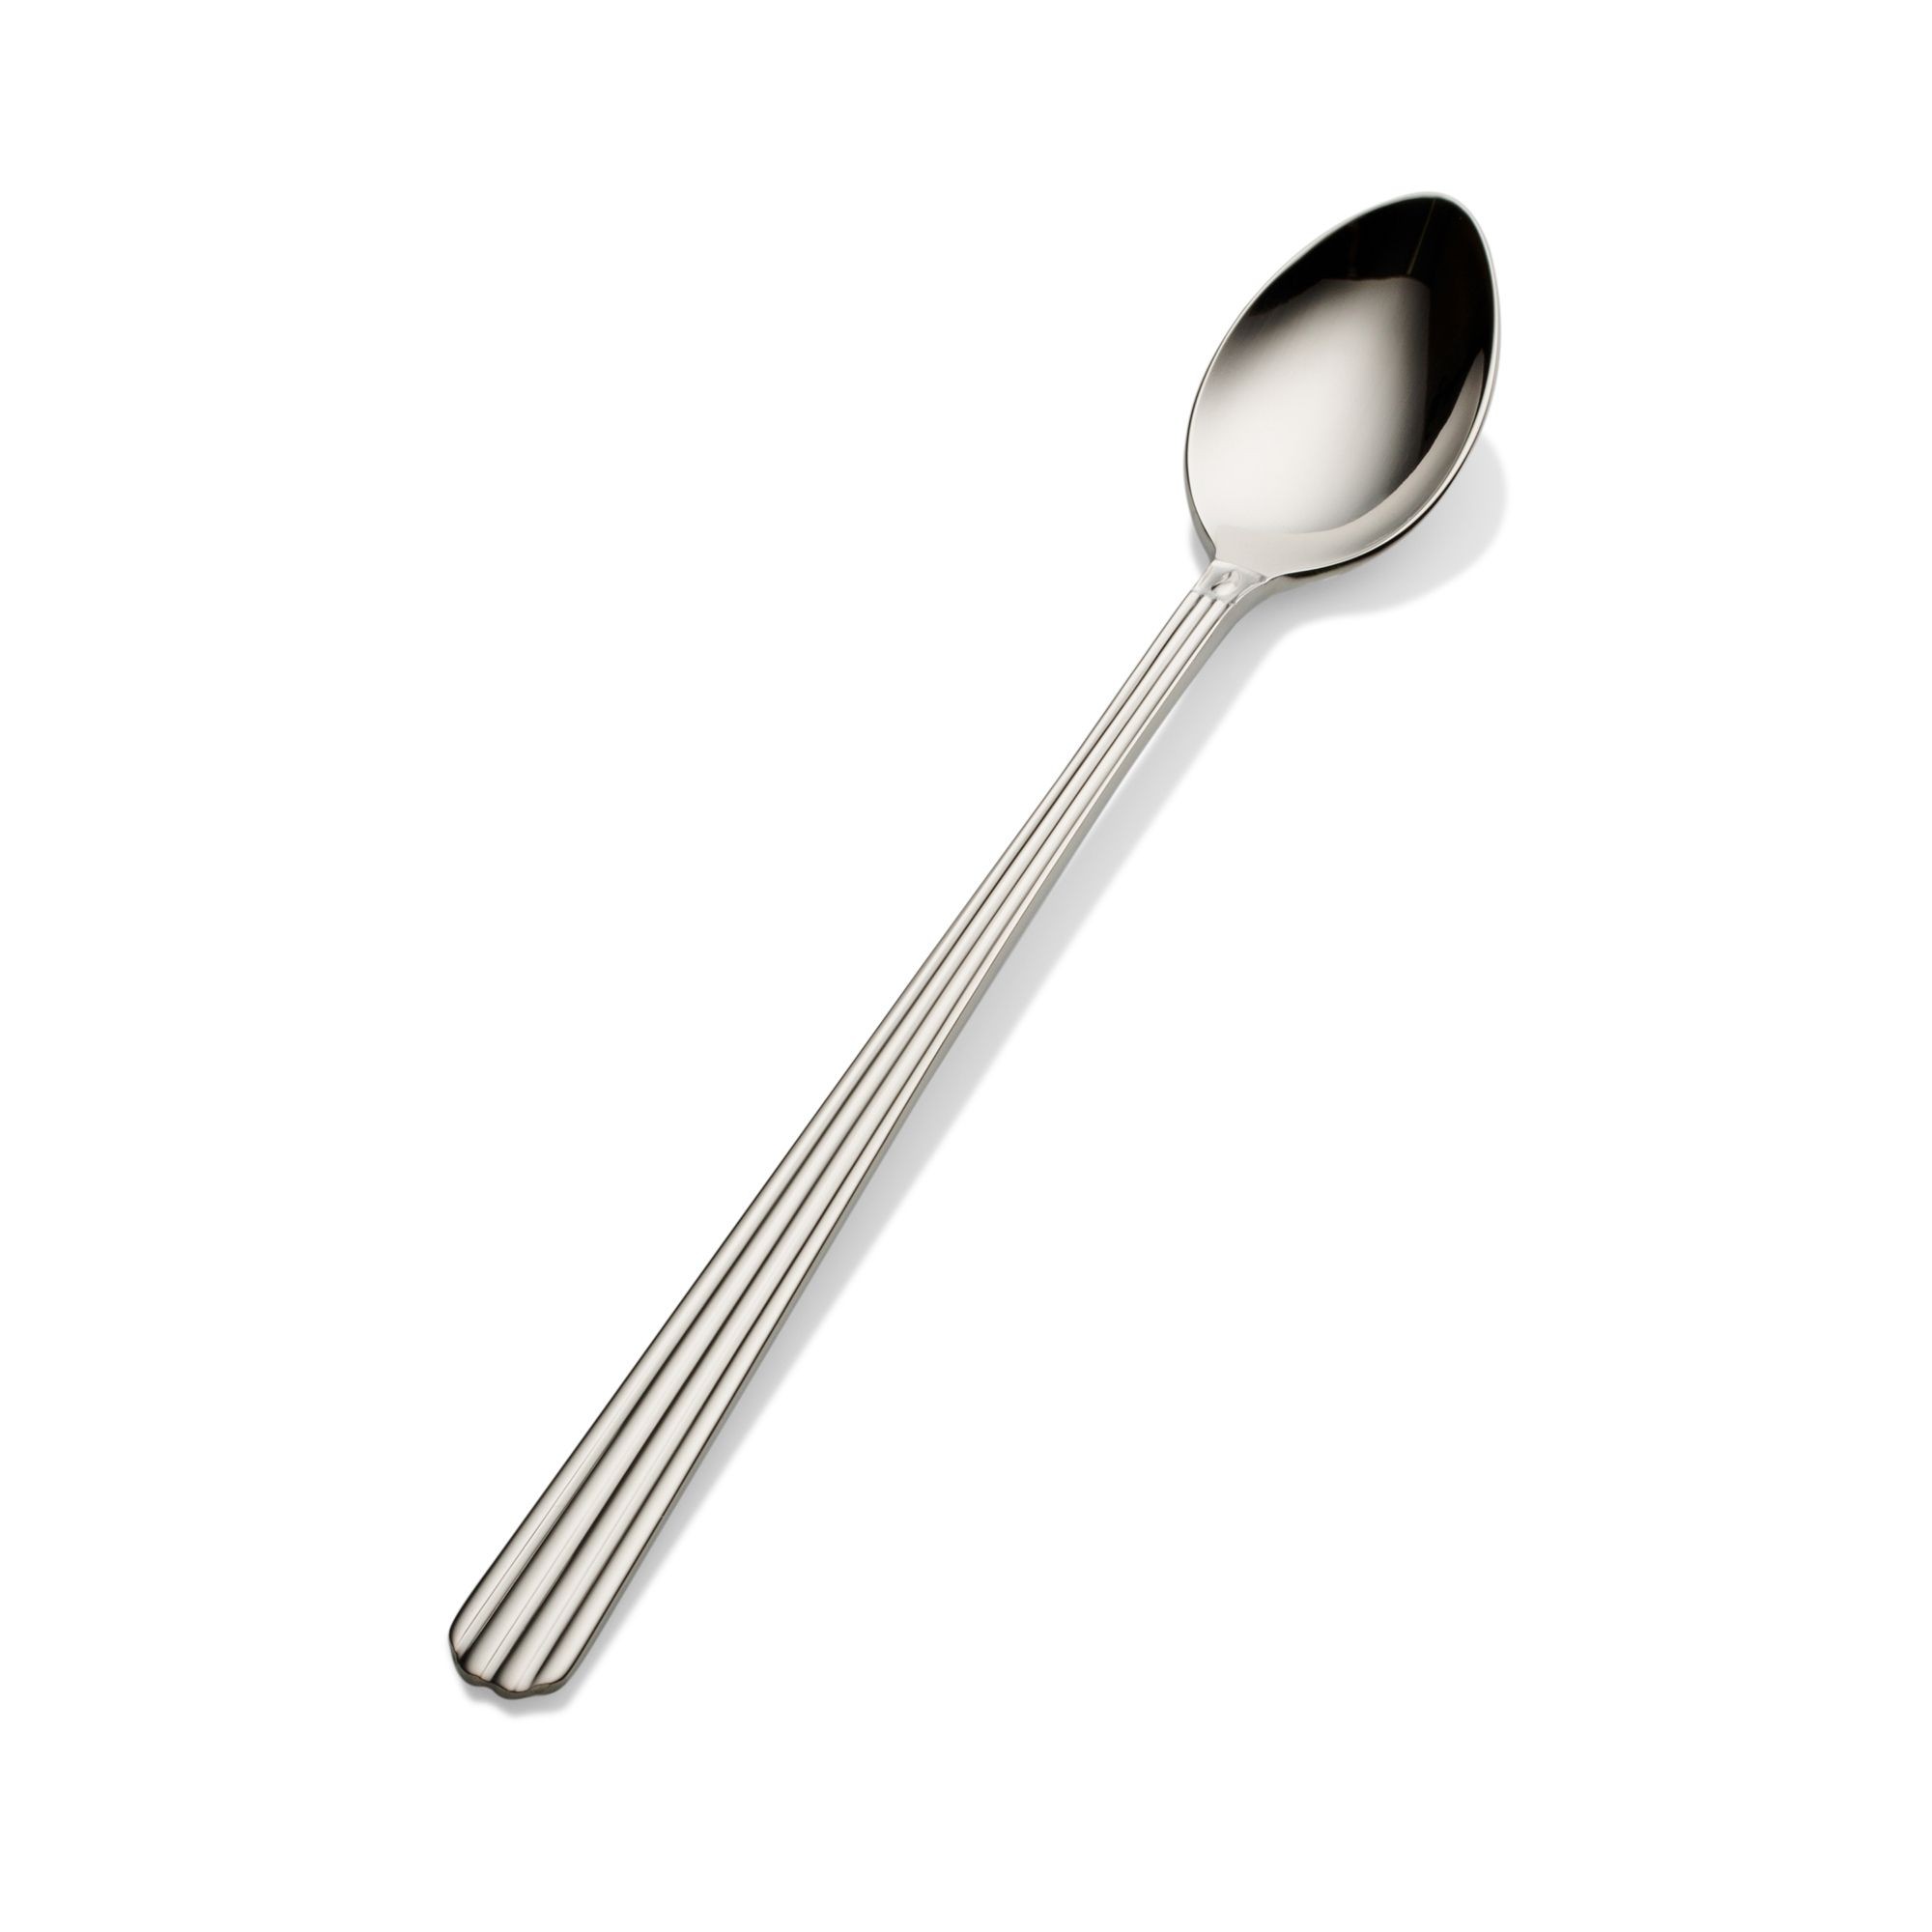 Bon Chef S1602 Britany 18/8 Stainless Steel Iced Tea Spoon